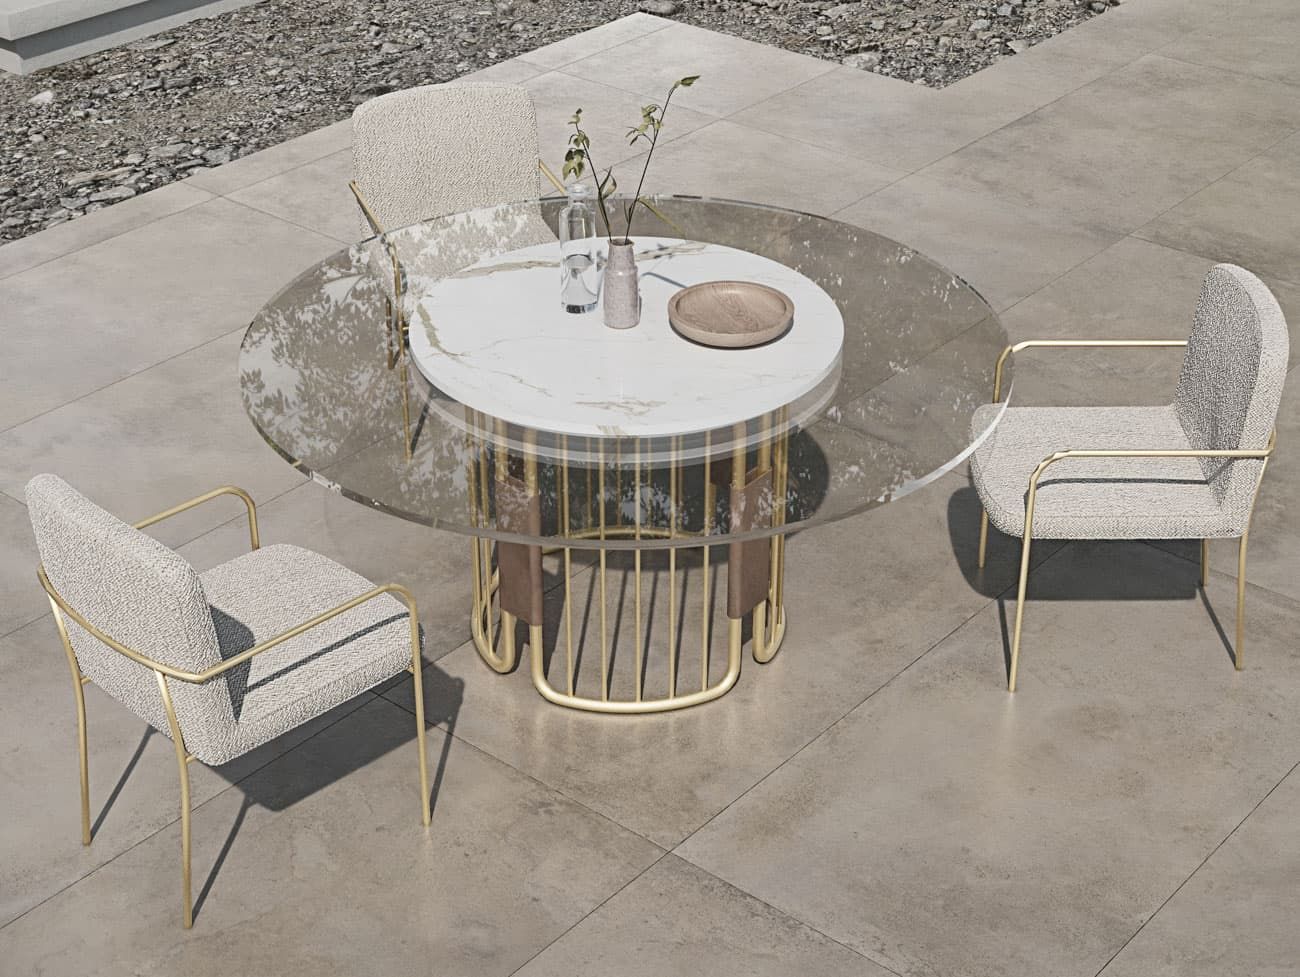 FORMITALIA OUTDOOR | Glam Dining Chair - $13,184.00